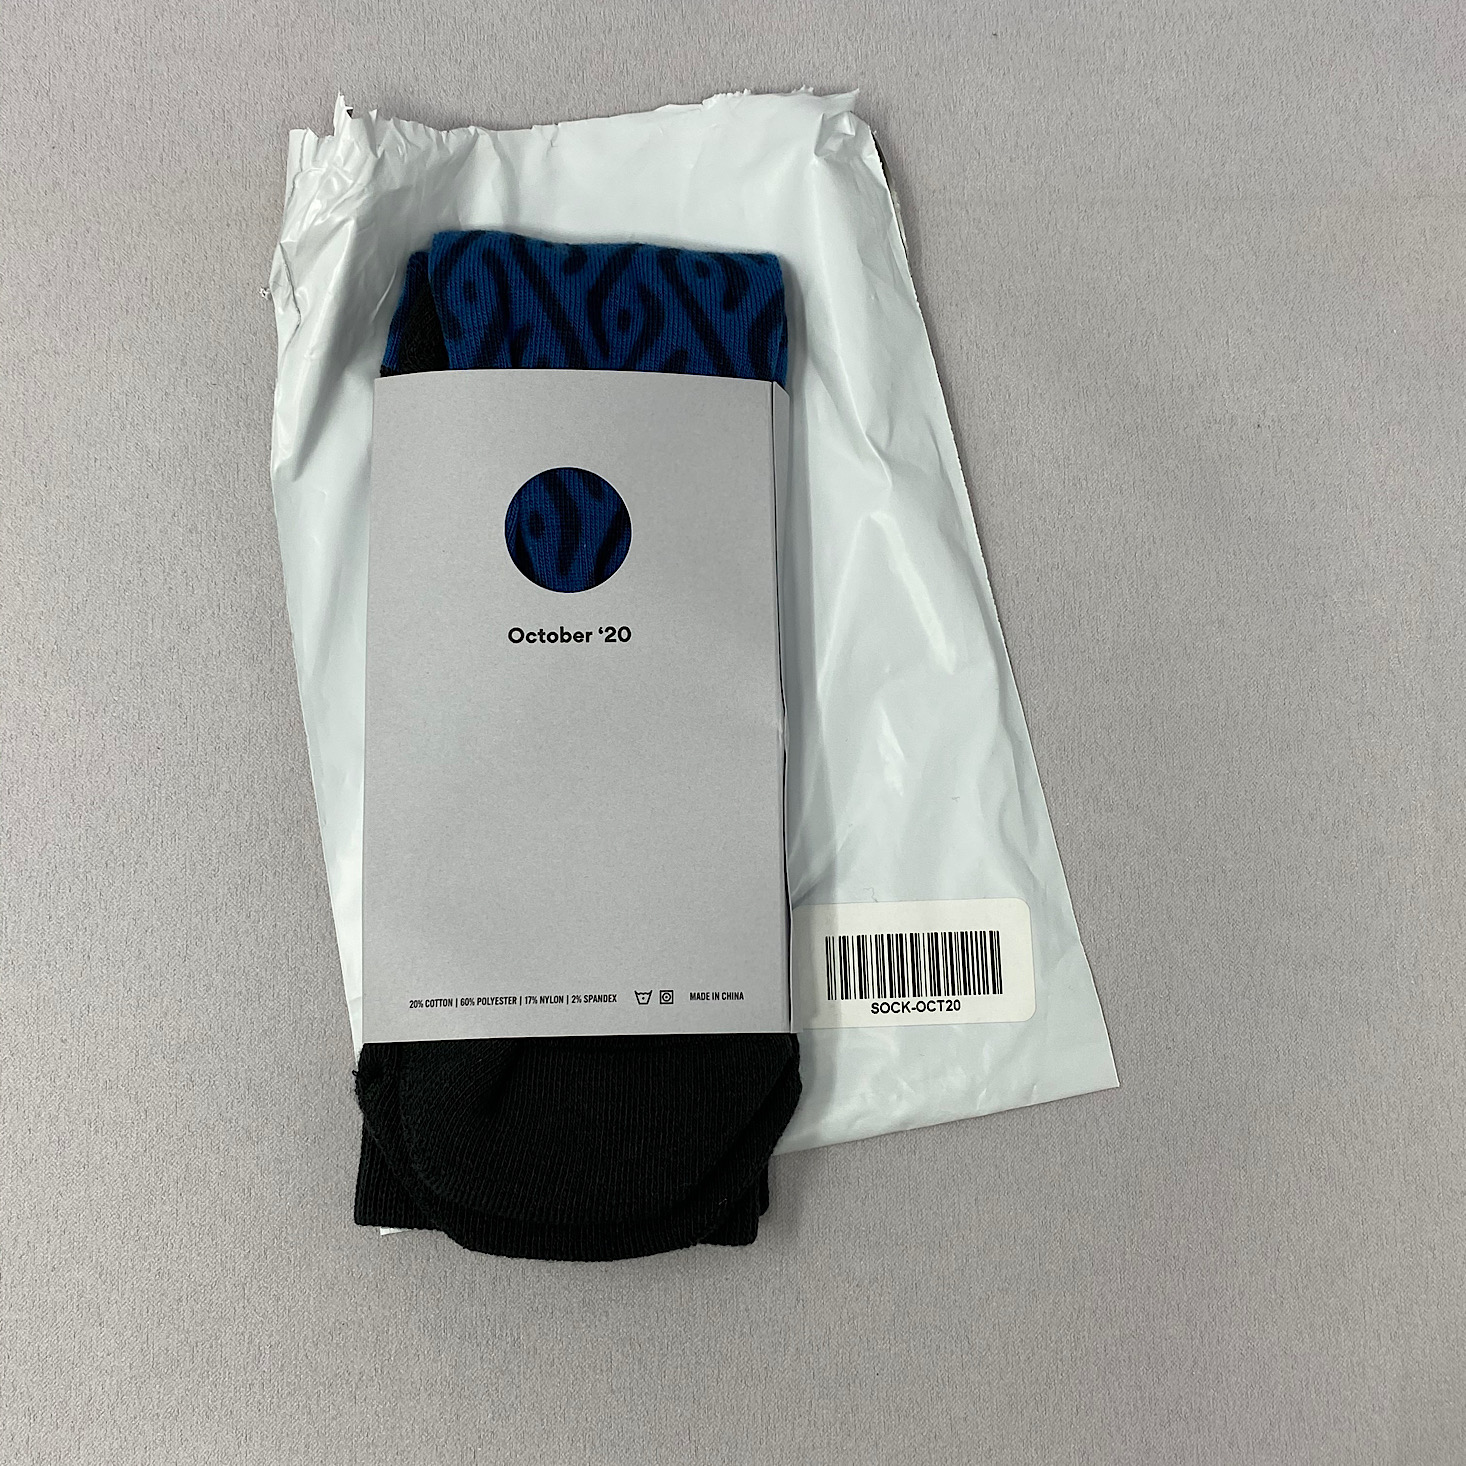 Wohven Socks Subscription Review + Coupon – October 2020